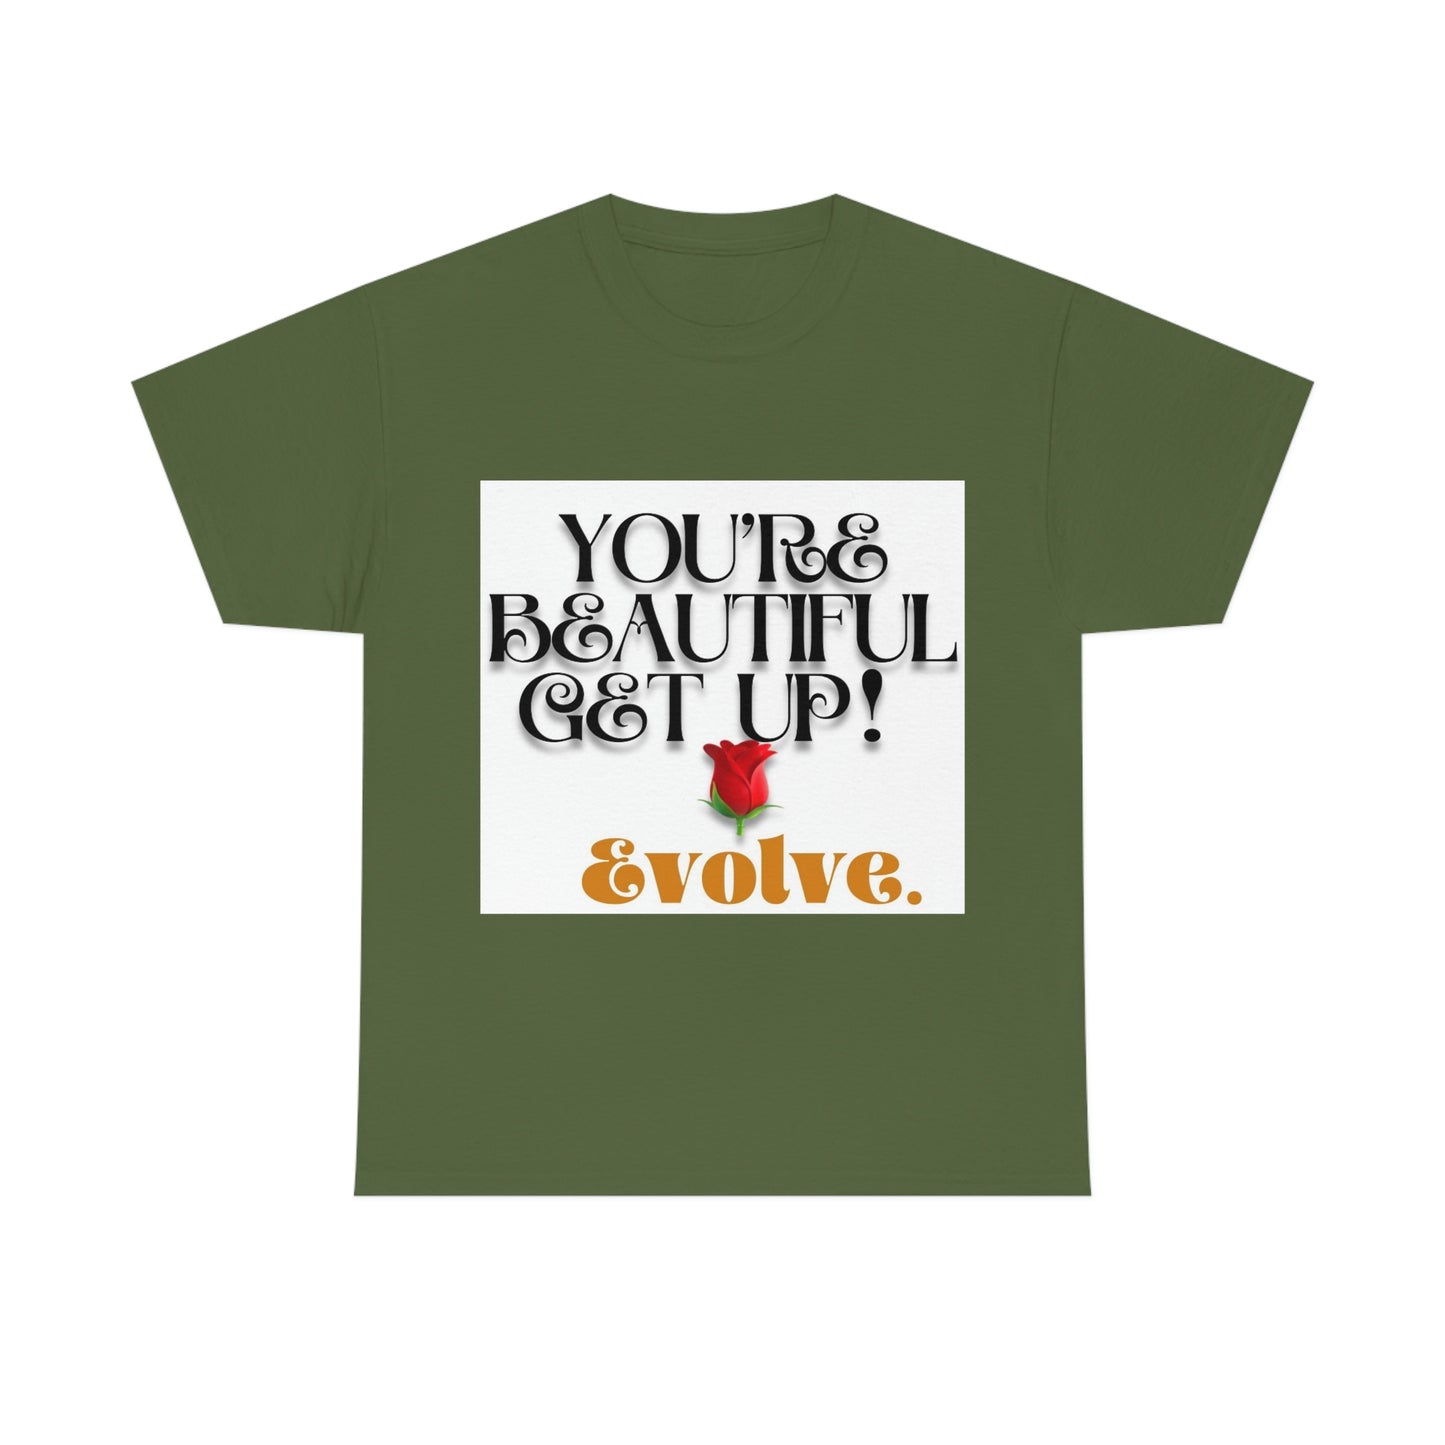 You’re Beautiful Get Up  Evolve Tshirt Unisex Heavy Cotton Tee Evolve Top Cotton Tshirt